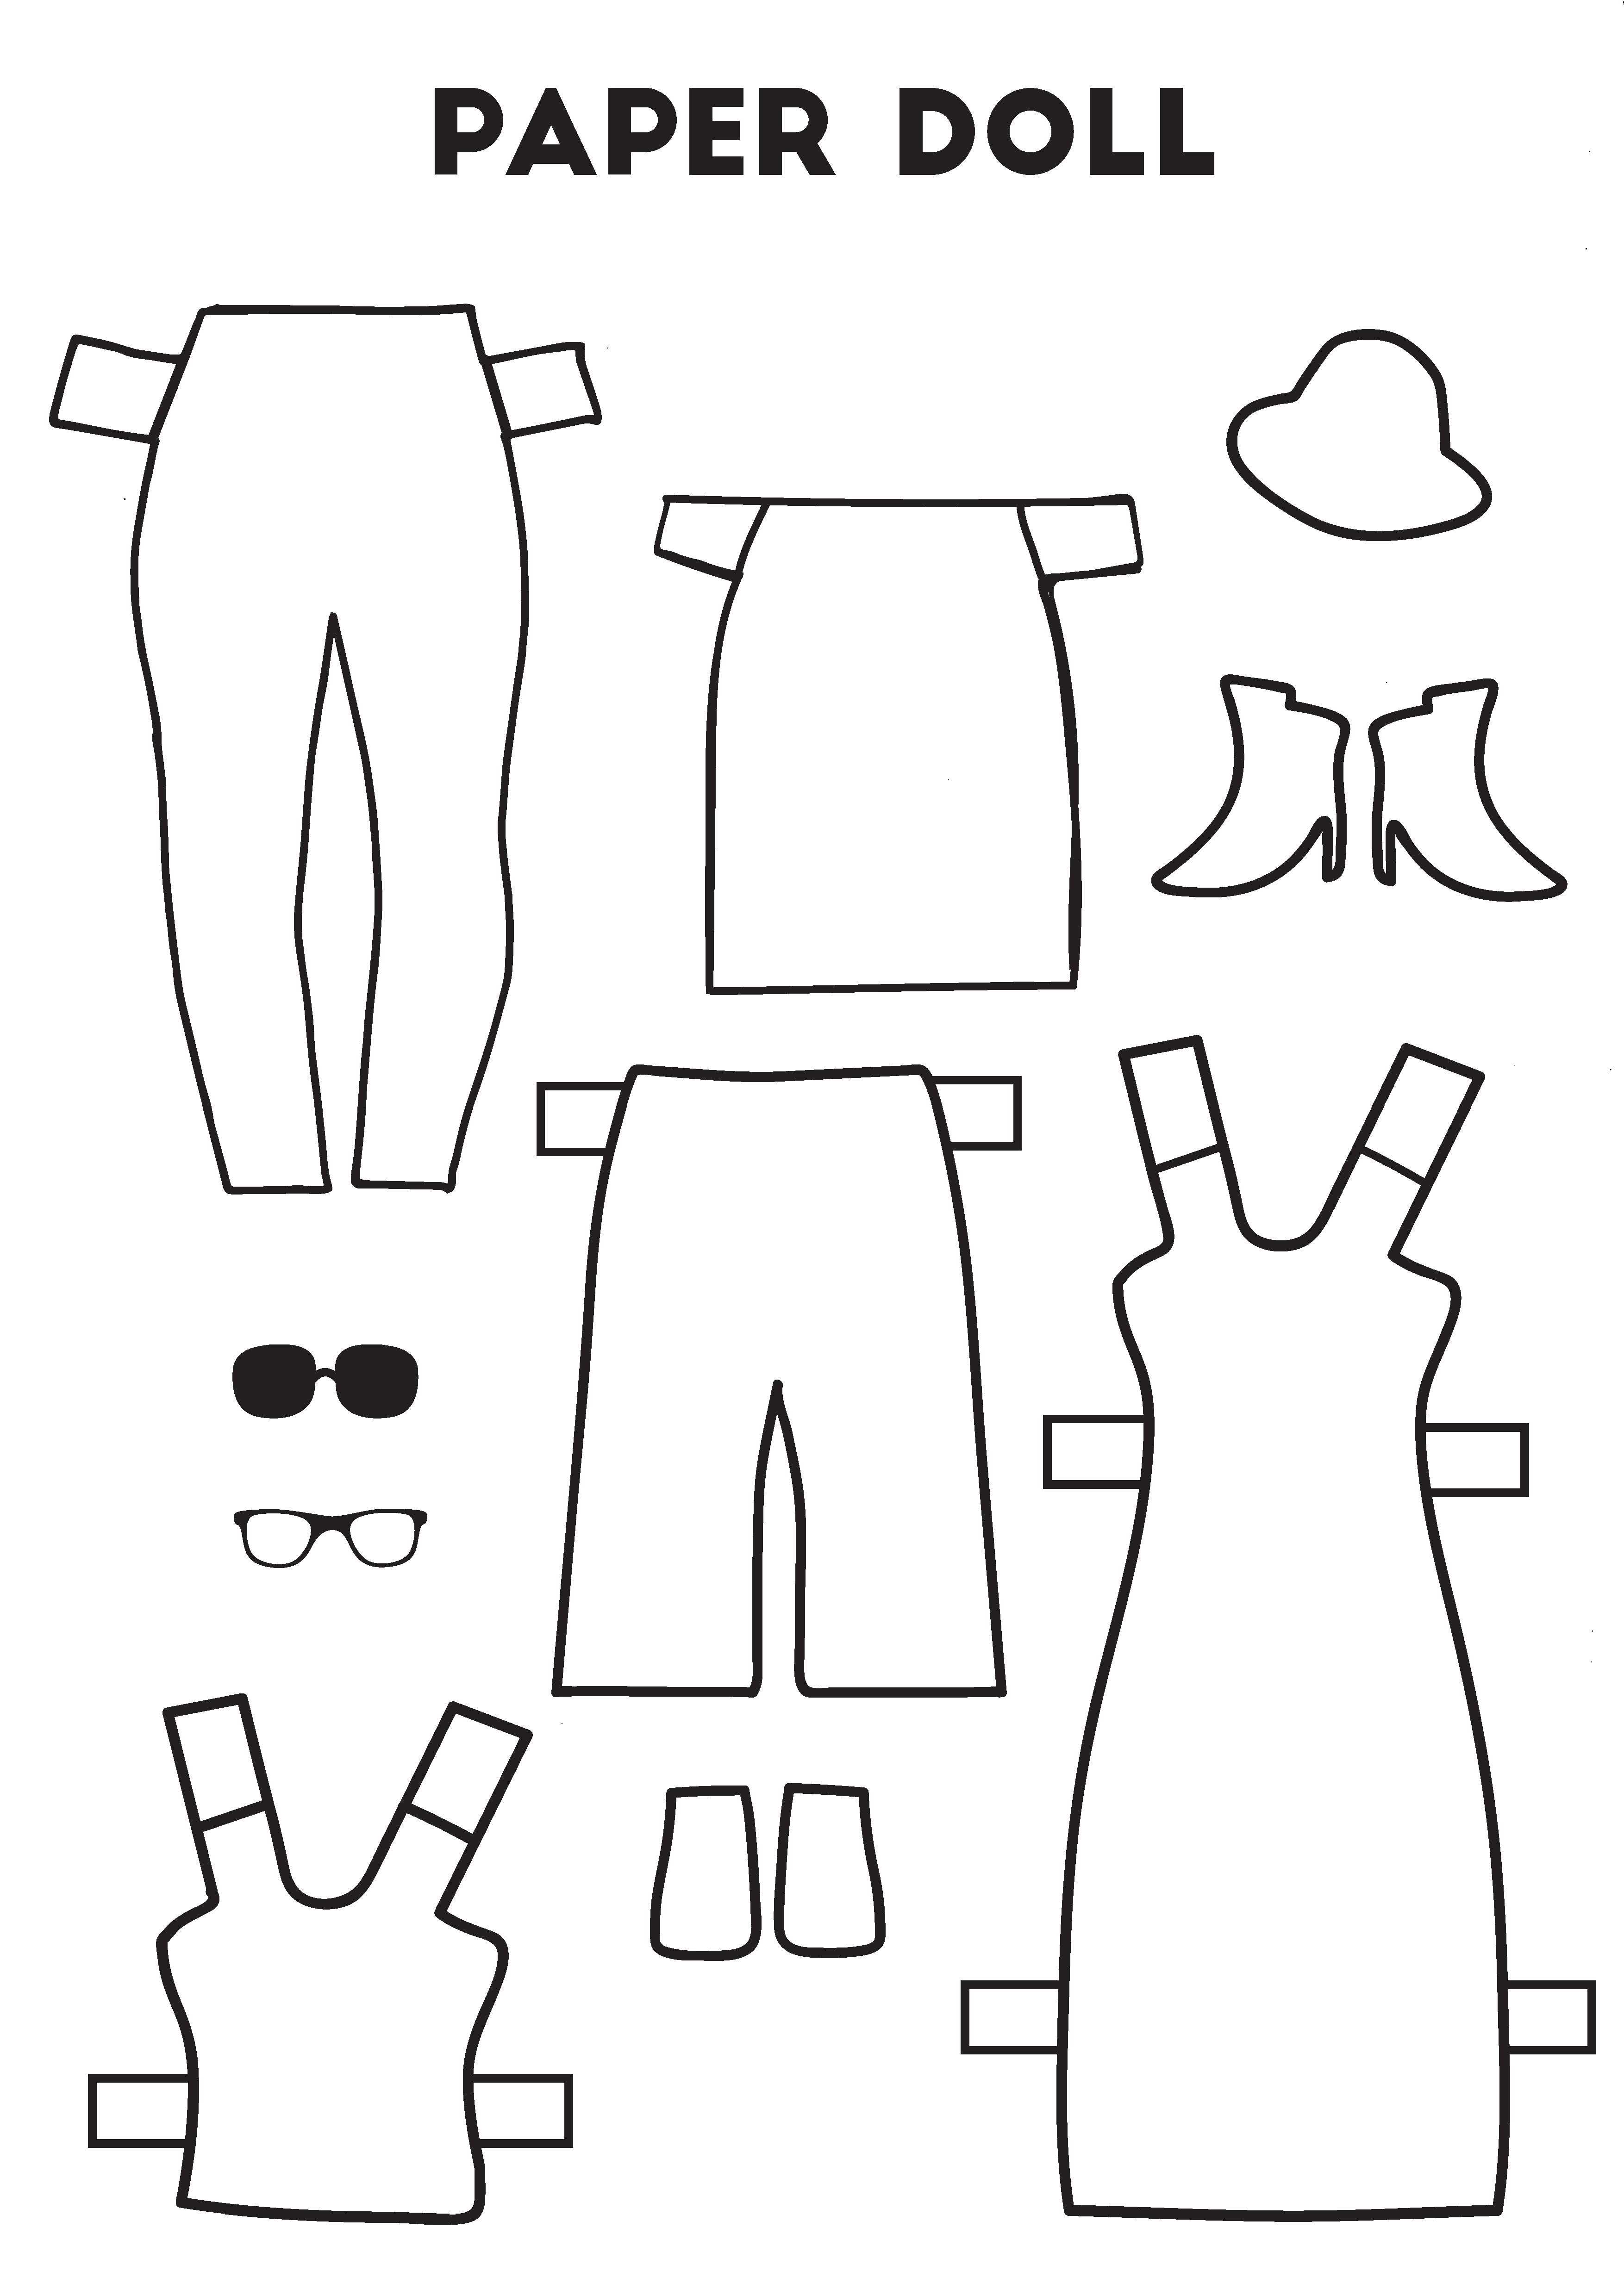 paper doll shapes